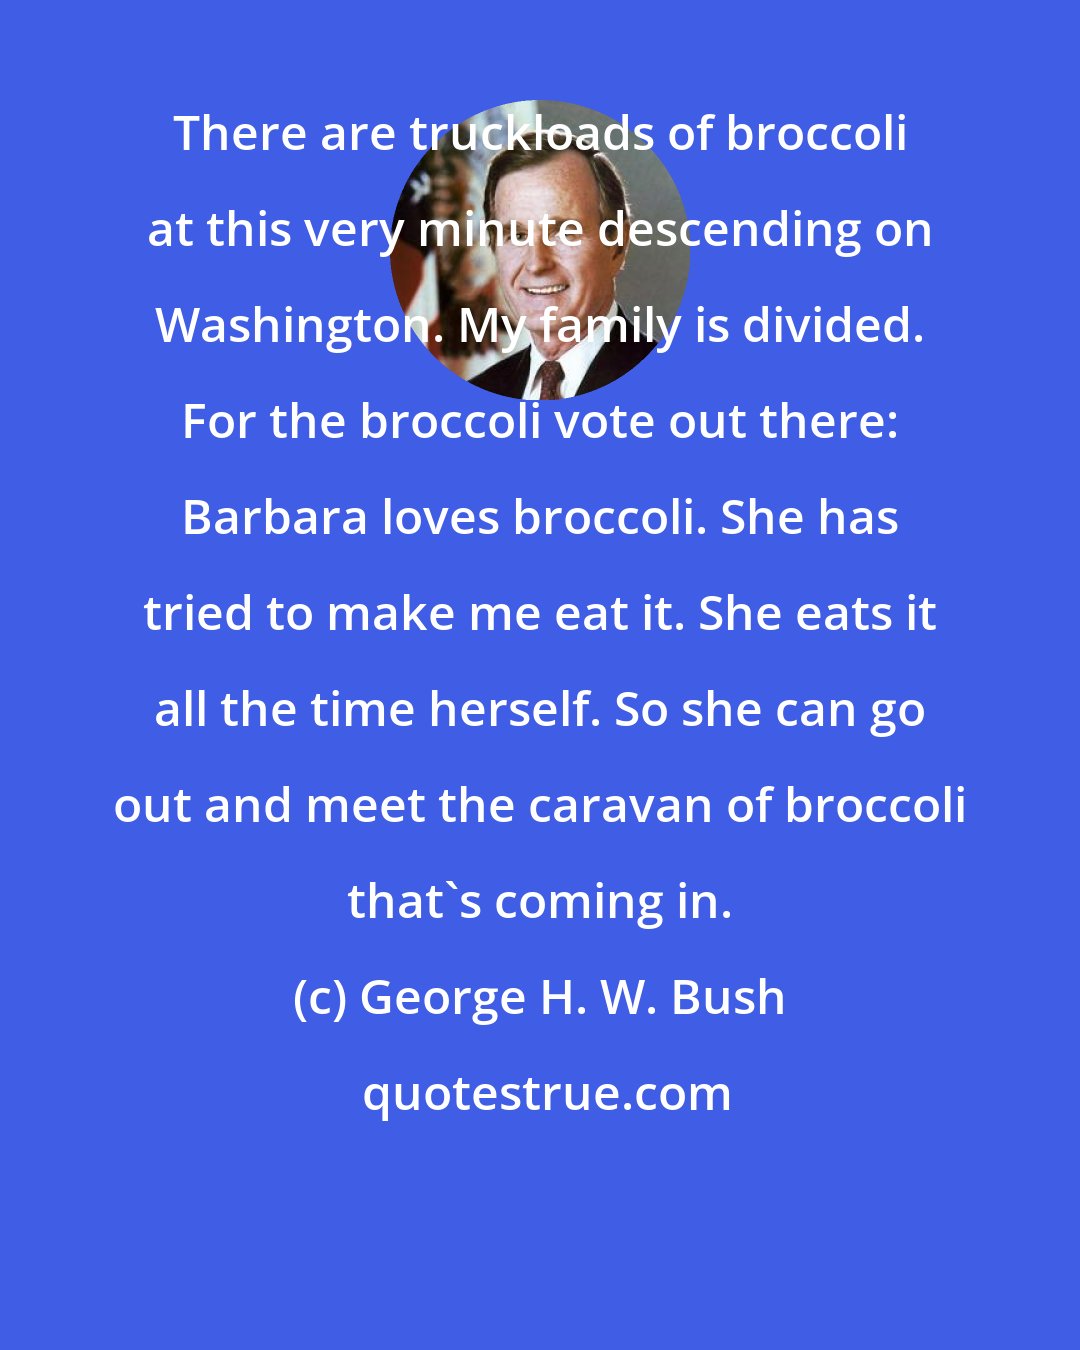 George H. W. Bush: There are truckloads of broccoli at this very minute descending on Washington. My family is divided. For the broccoli vote out there: Barbara loves broccoli. She has tried to make me eat it. She eats it all the time herself. So she can go out and meet the caravan of broccoli that's coming in.